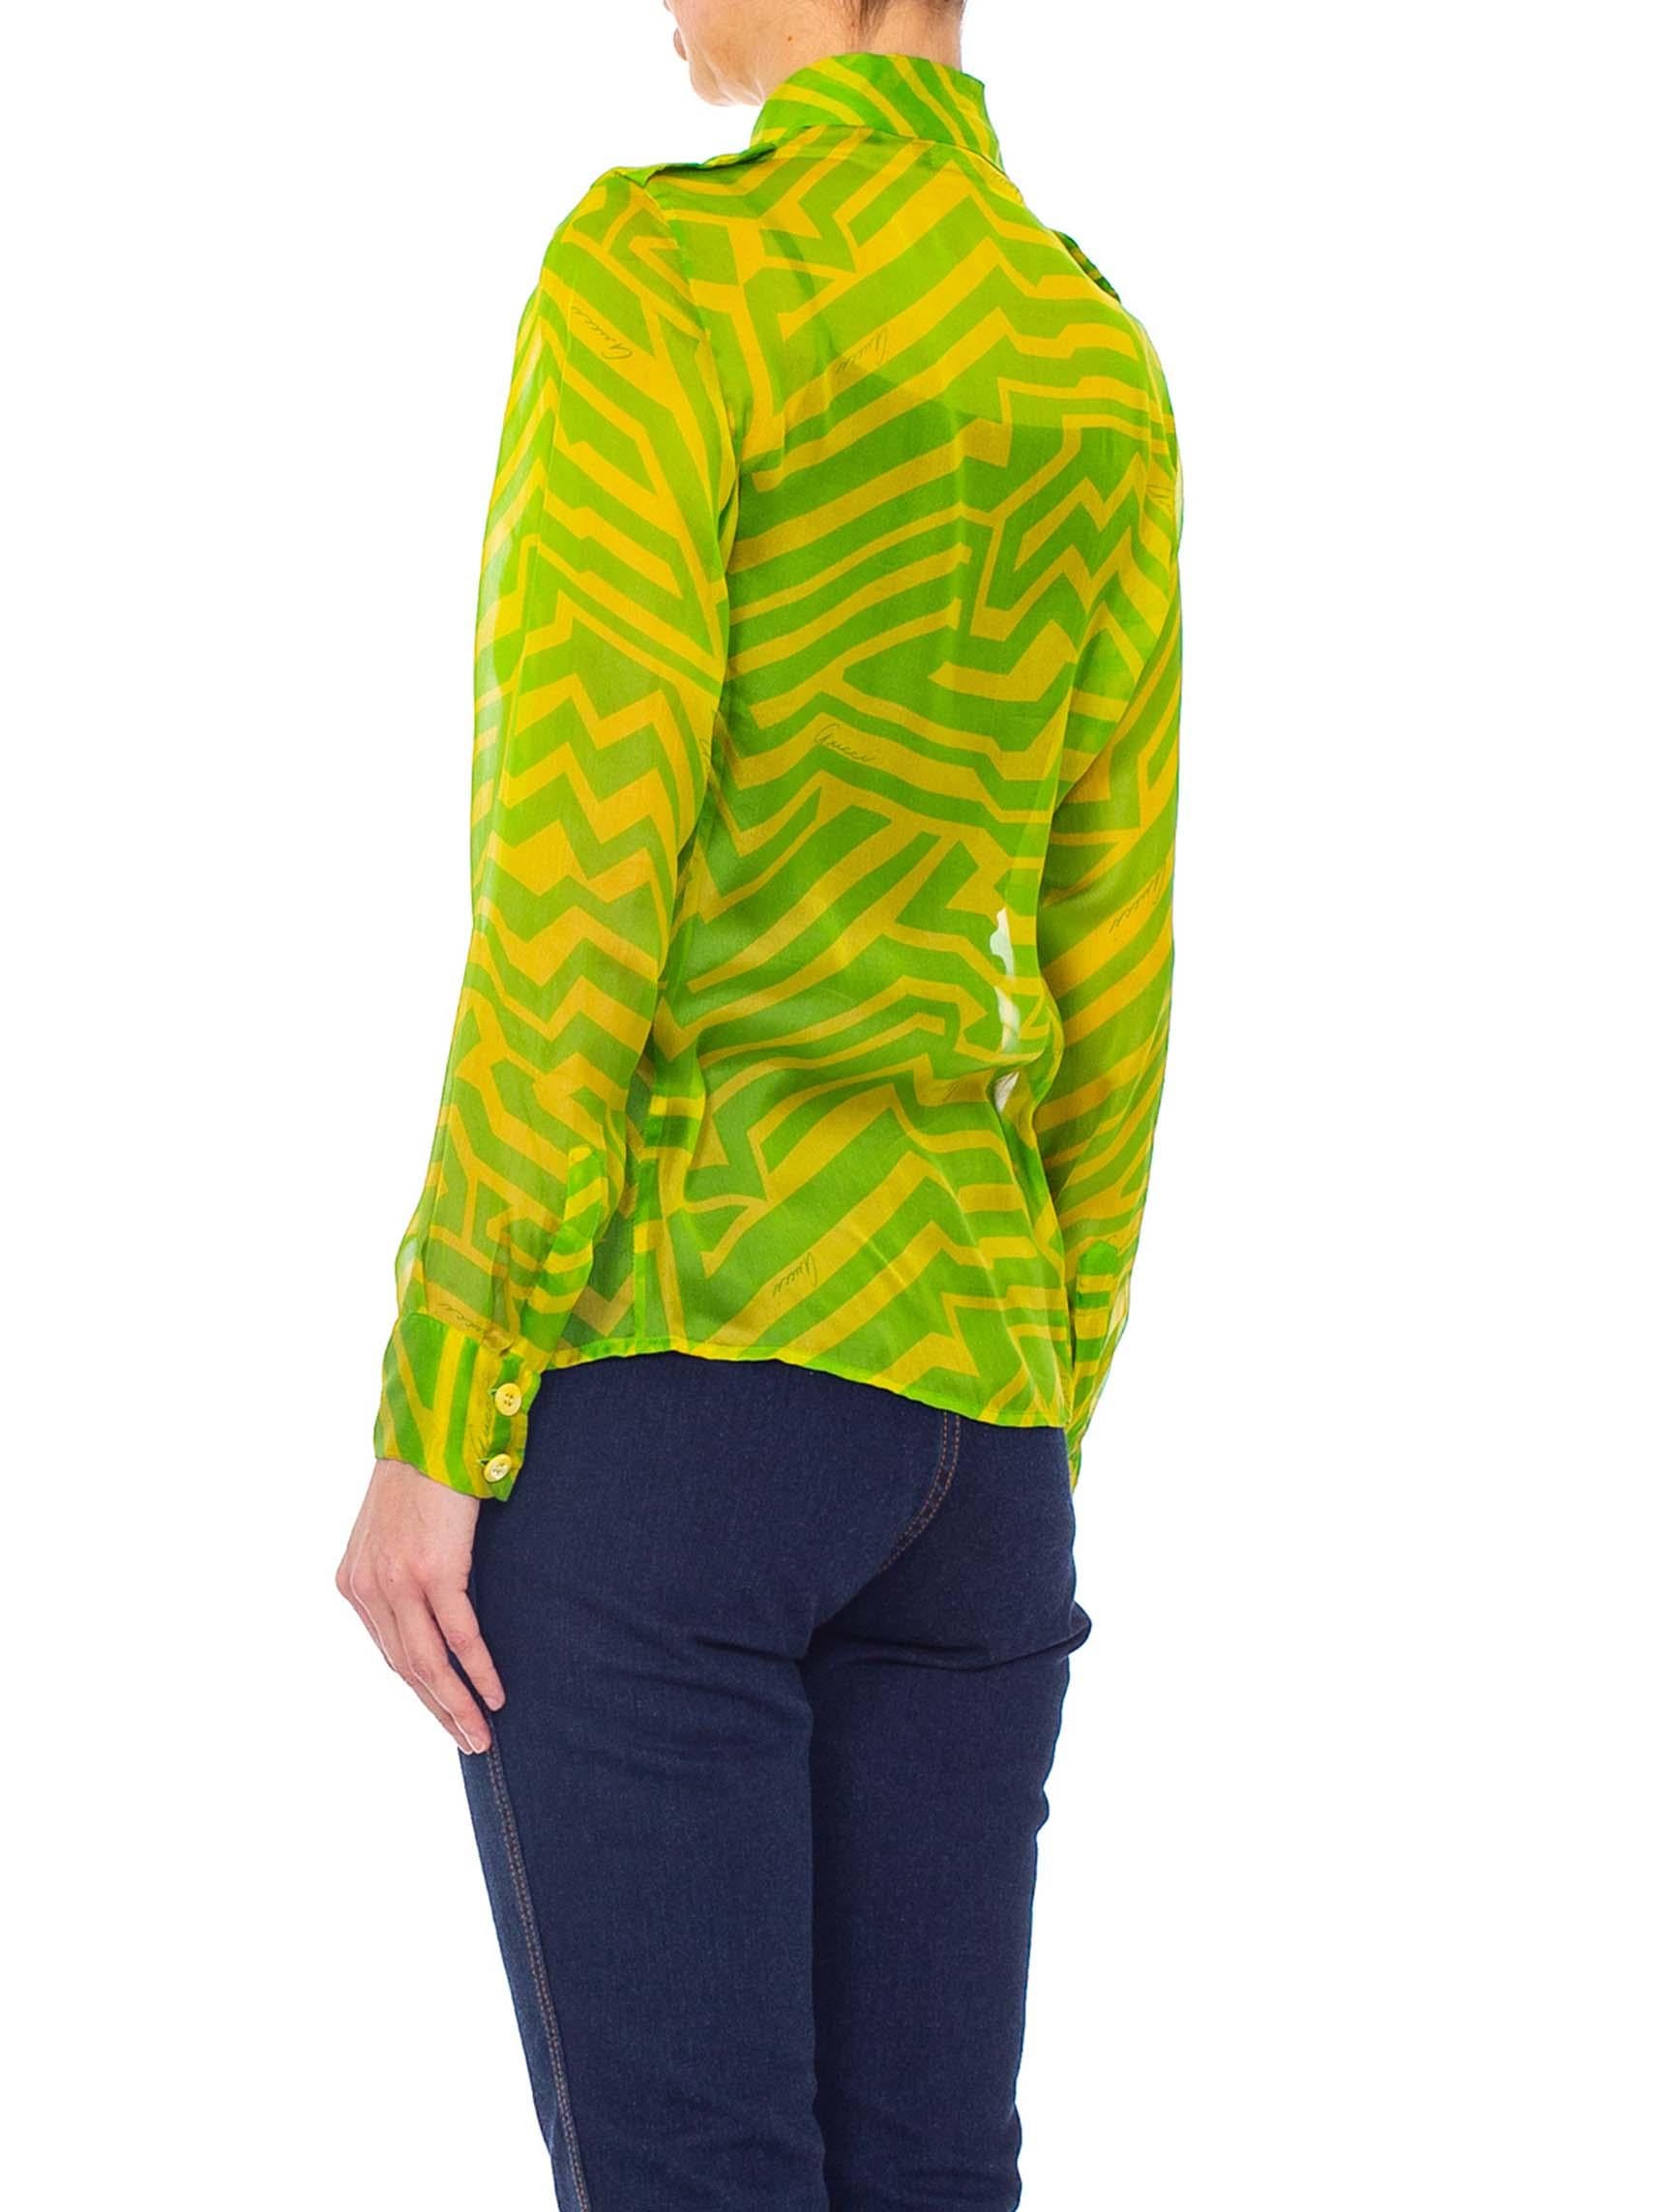 1990S TOM FORD GUCCI Lime Green Silk Chiffon Shirt From His First Collection For 4